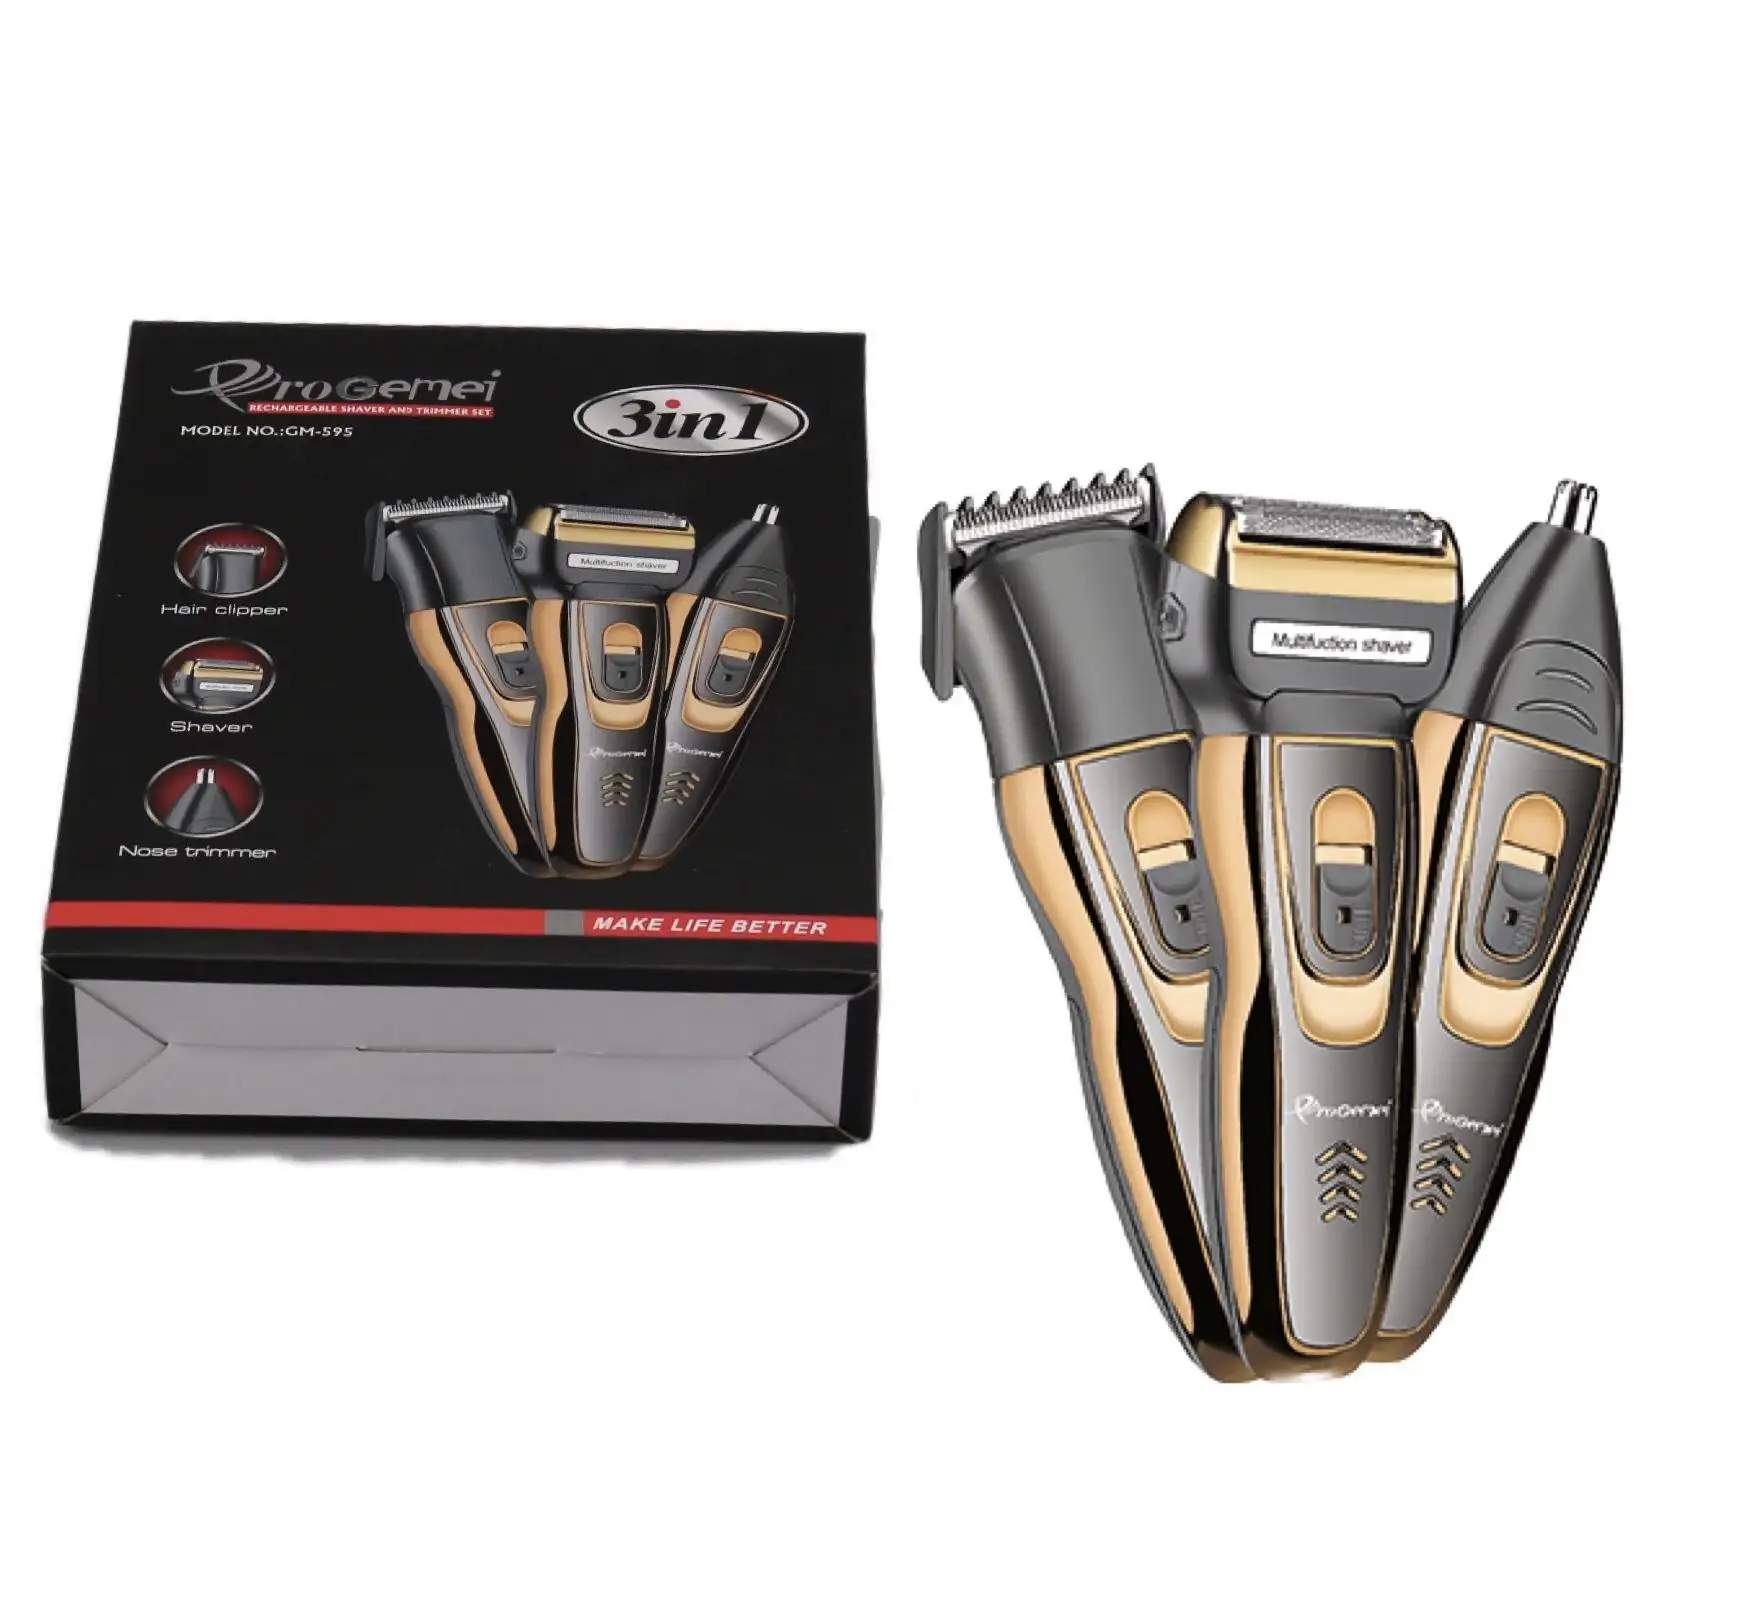 Geemy Gm-595 Waterproof 3 In 1 Hair Clipper And Trimmer in Nepal - Buy  Trimmers at Best Price at 